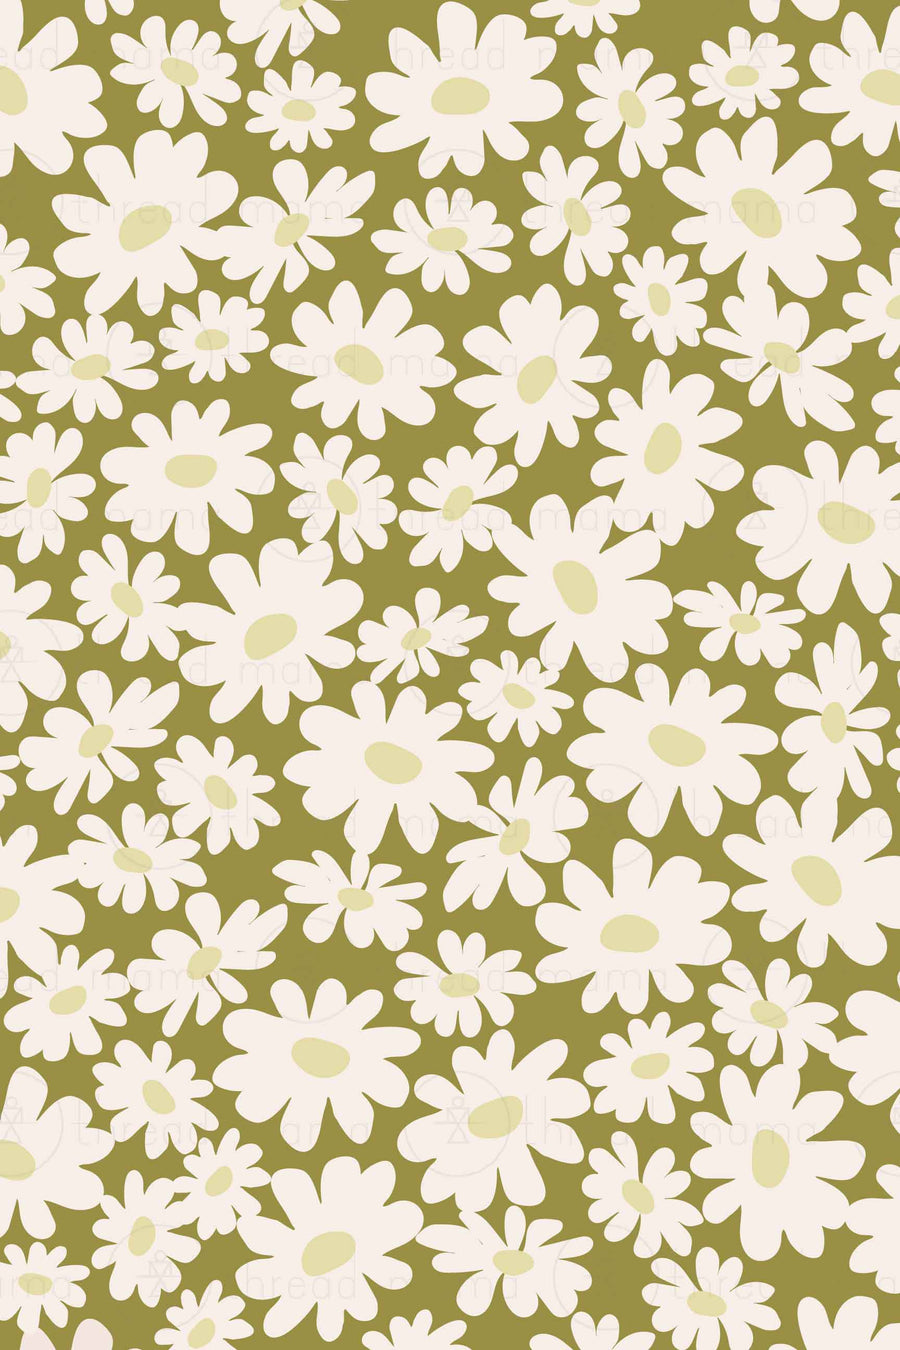 Background Pattern #51 collection (Printable Poster)